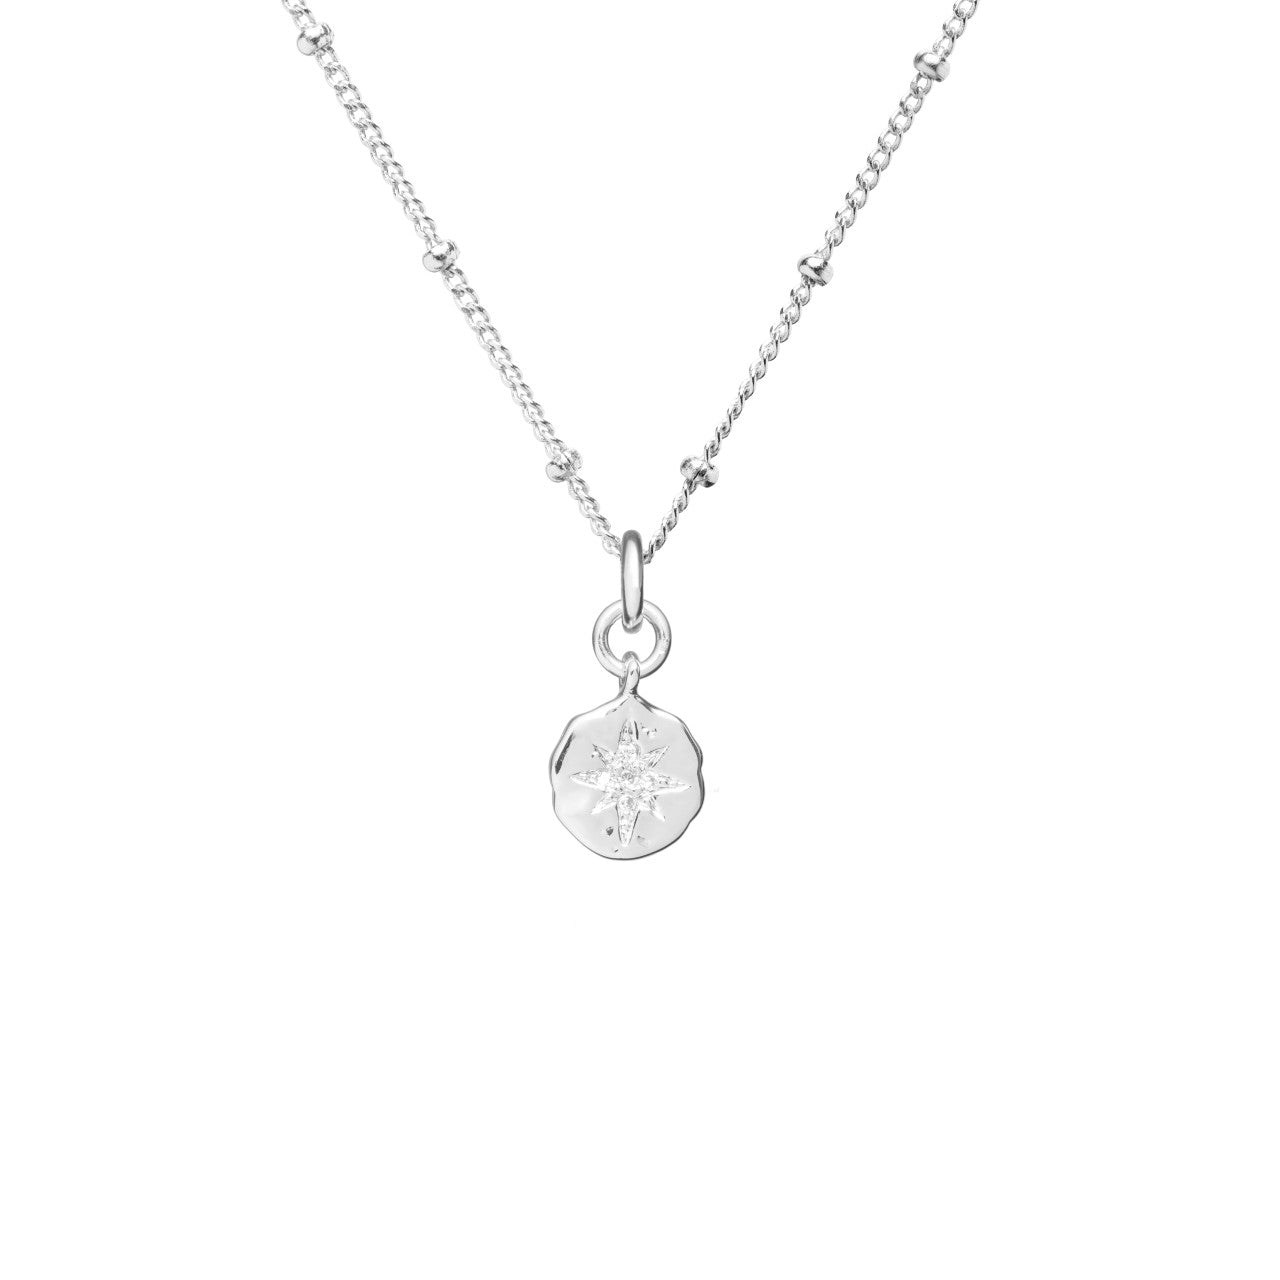 Celestial Coin Necklace (Sterling Silver)